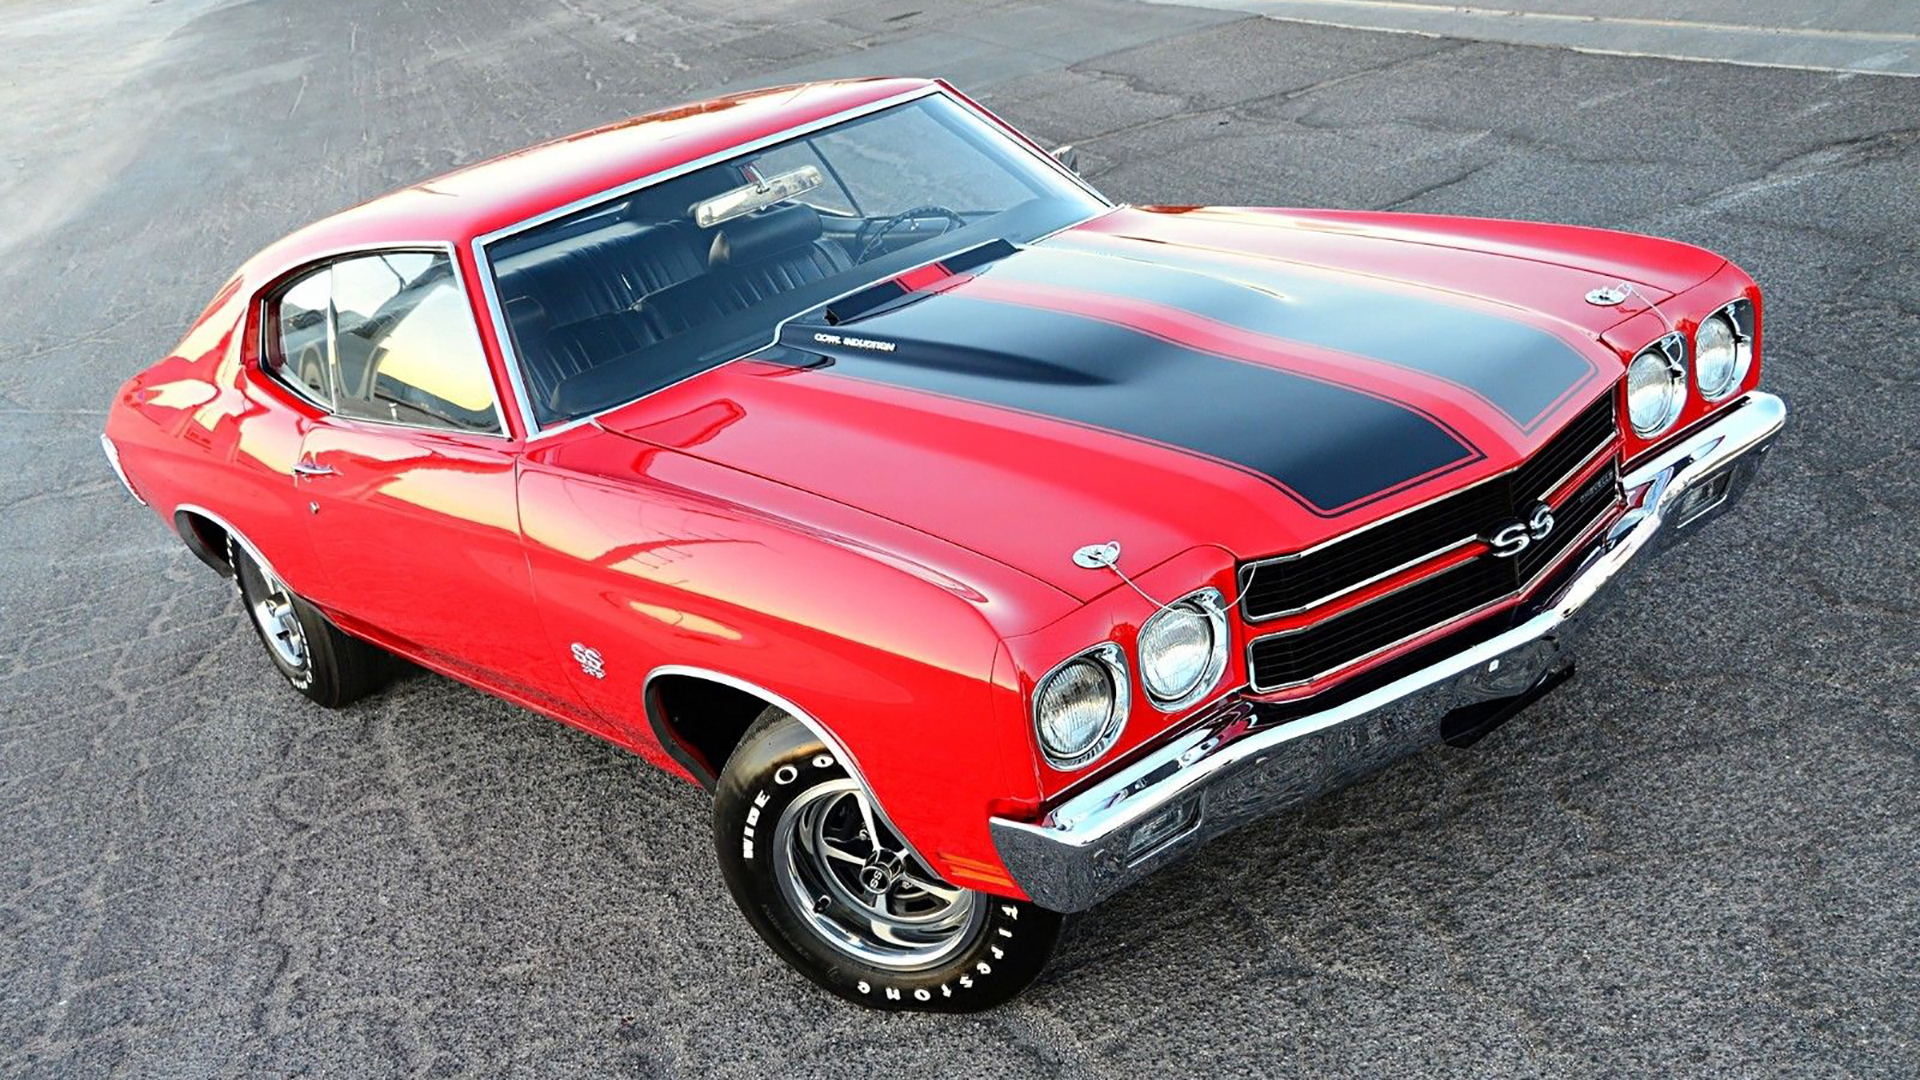 1970 Chevrolet Chevelle SS Prototype Up For Sale.